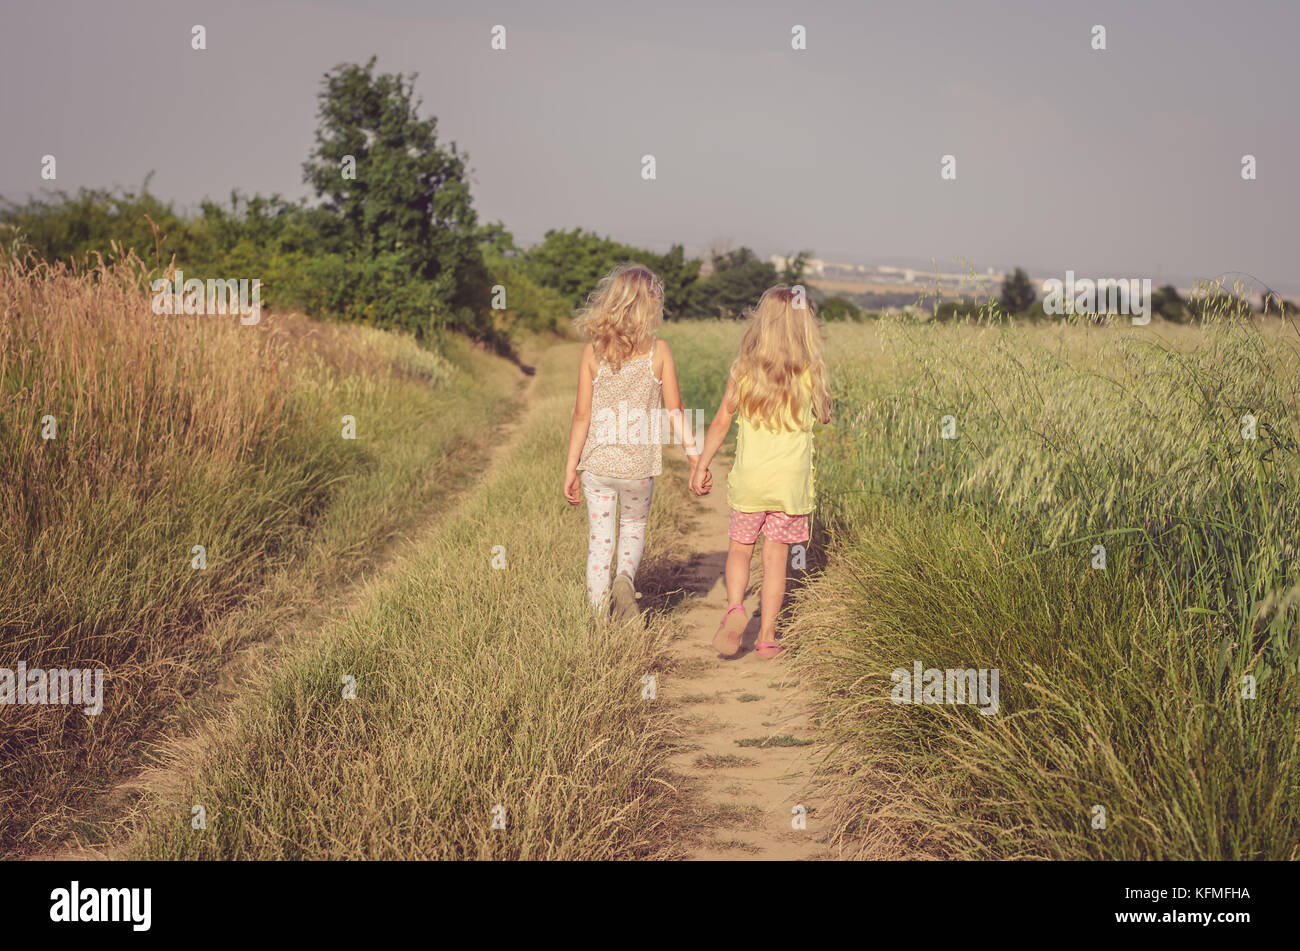 two children walking in romantic colorful rural path among fields Stock Photo